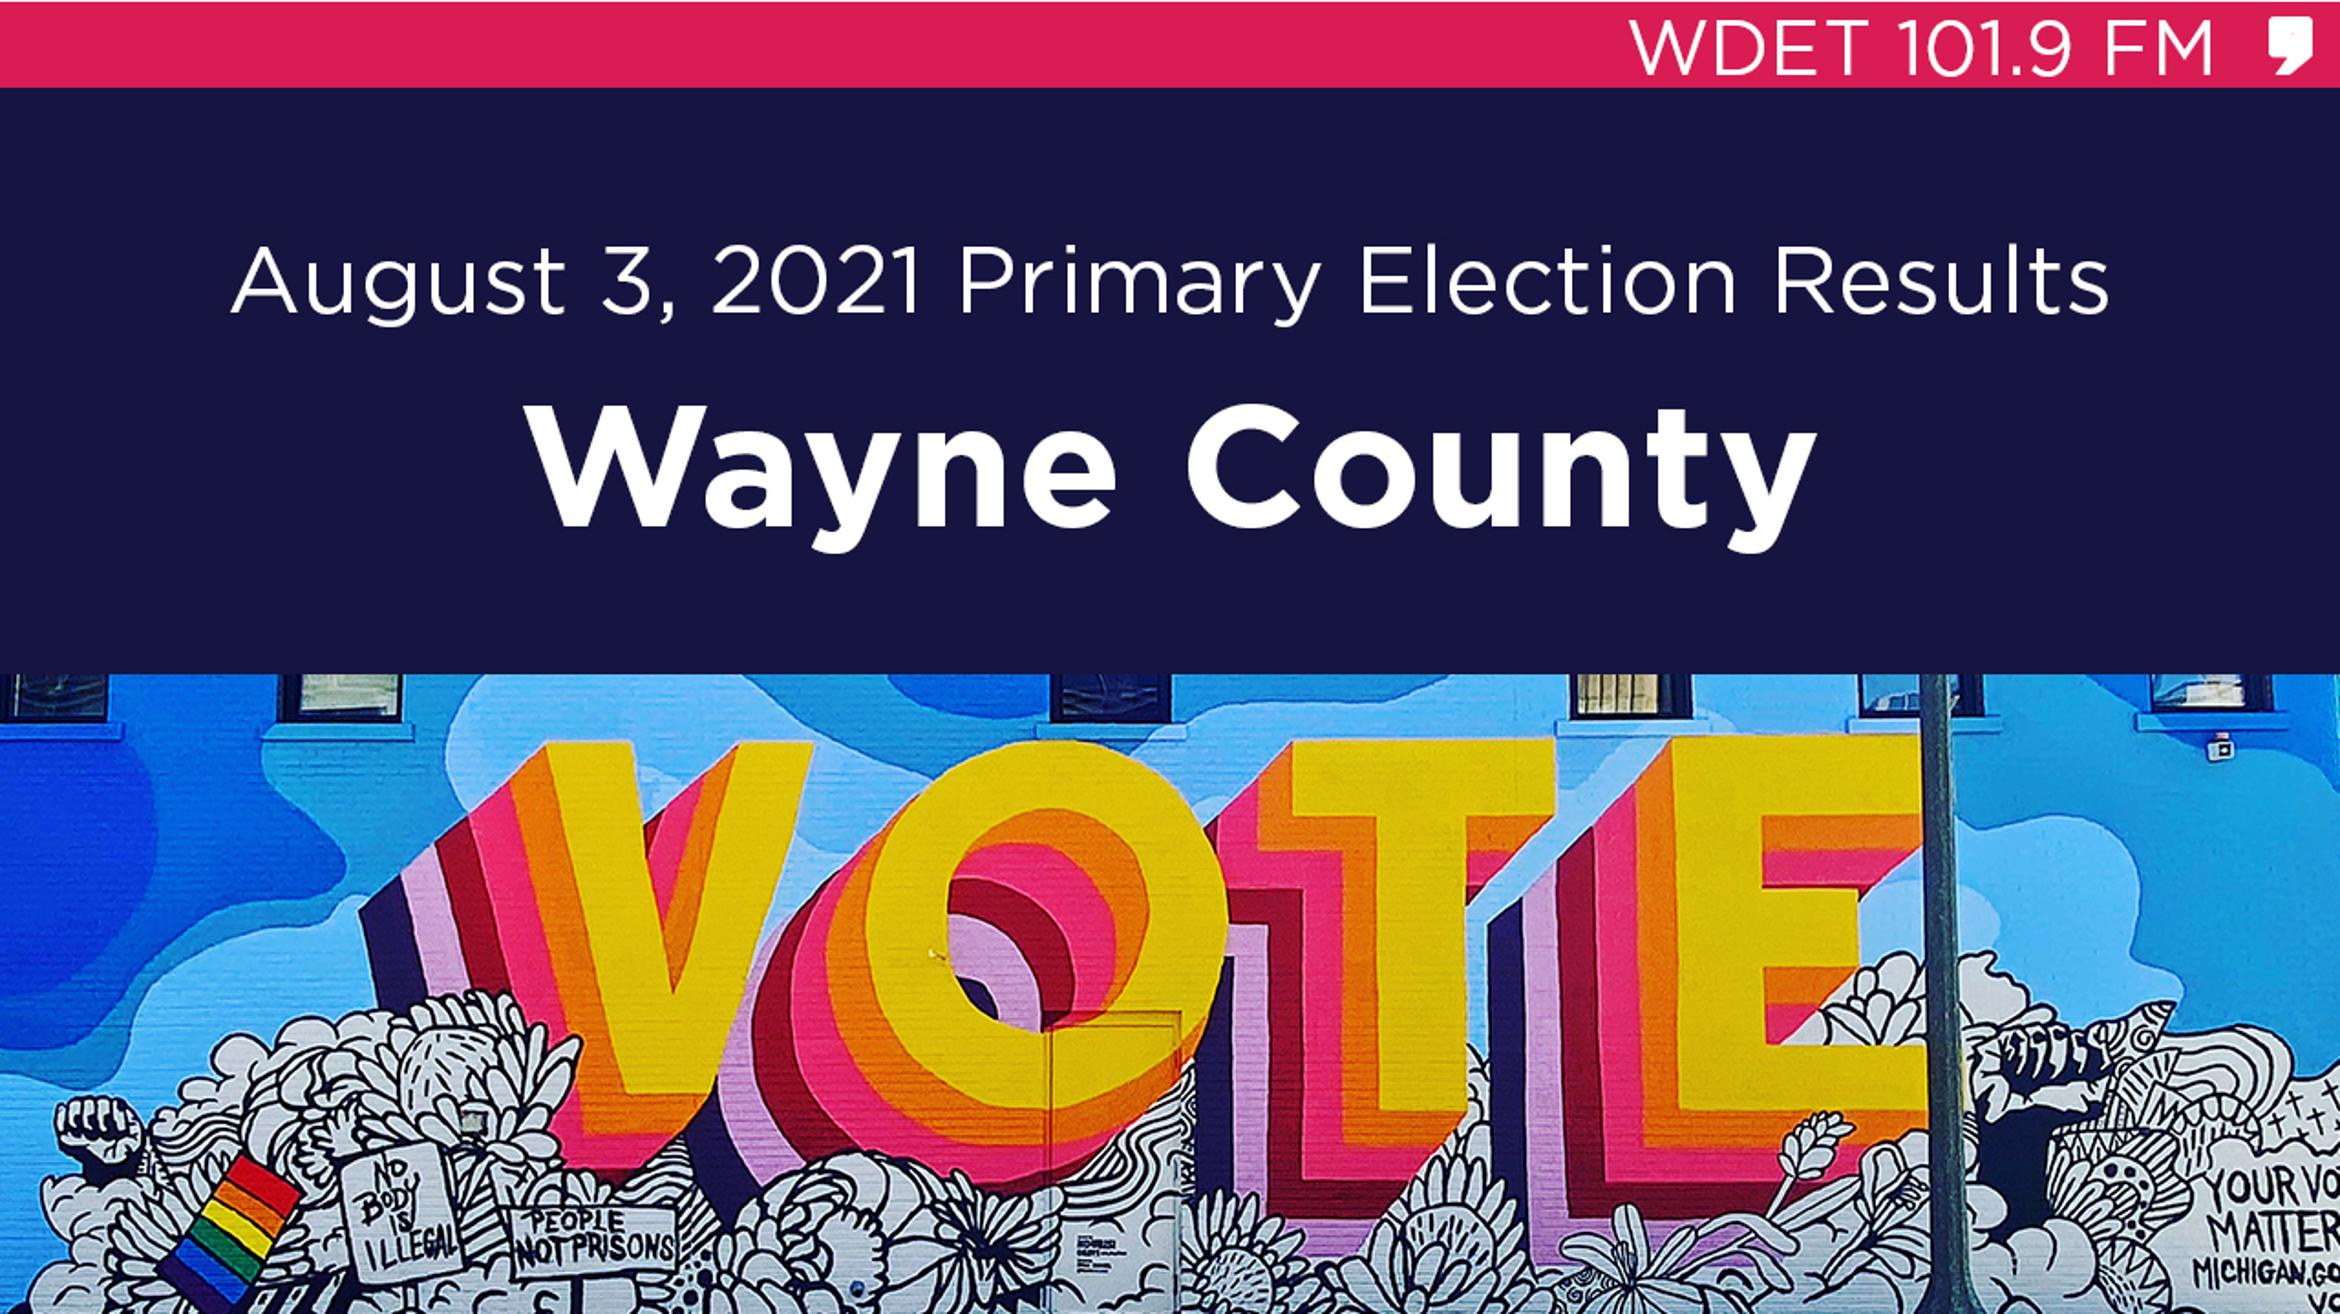 Wayne County August 3 Primary Election Results WDET